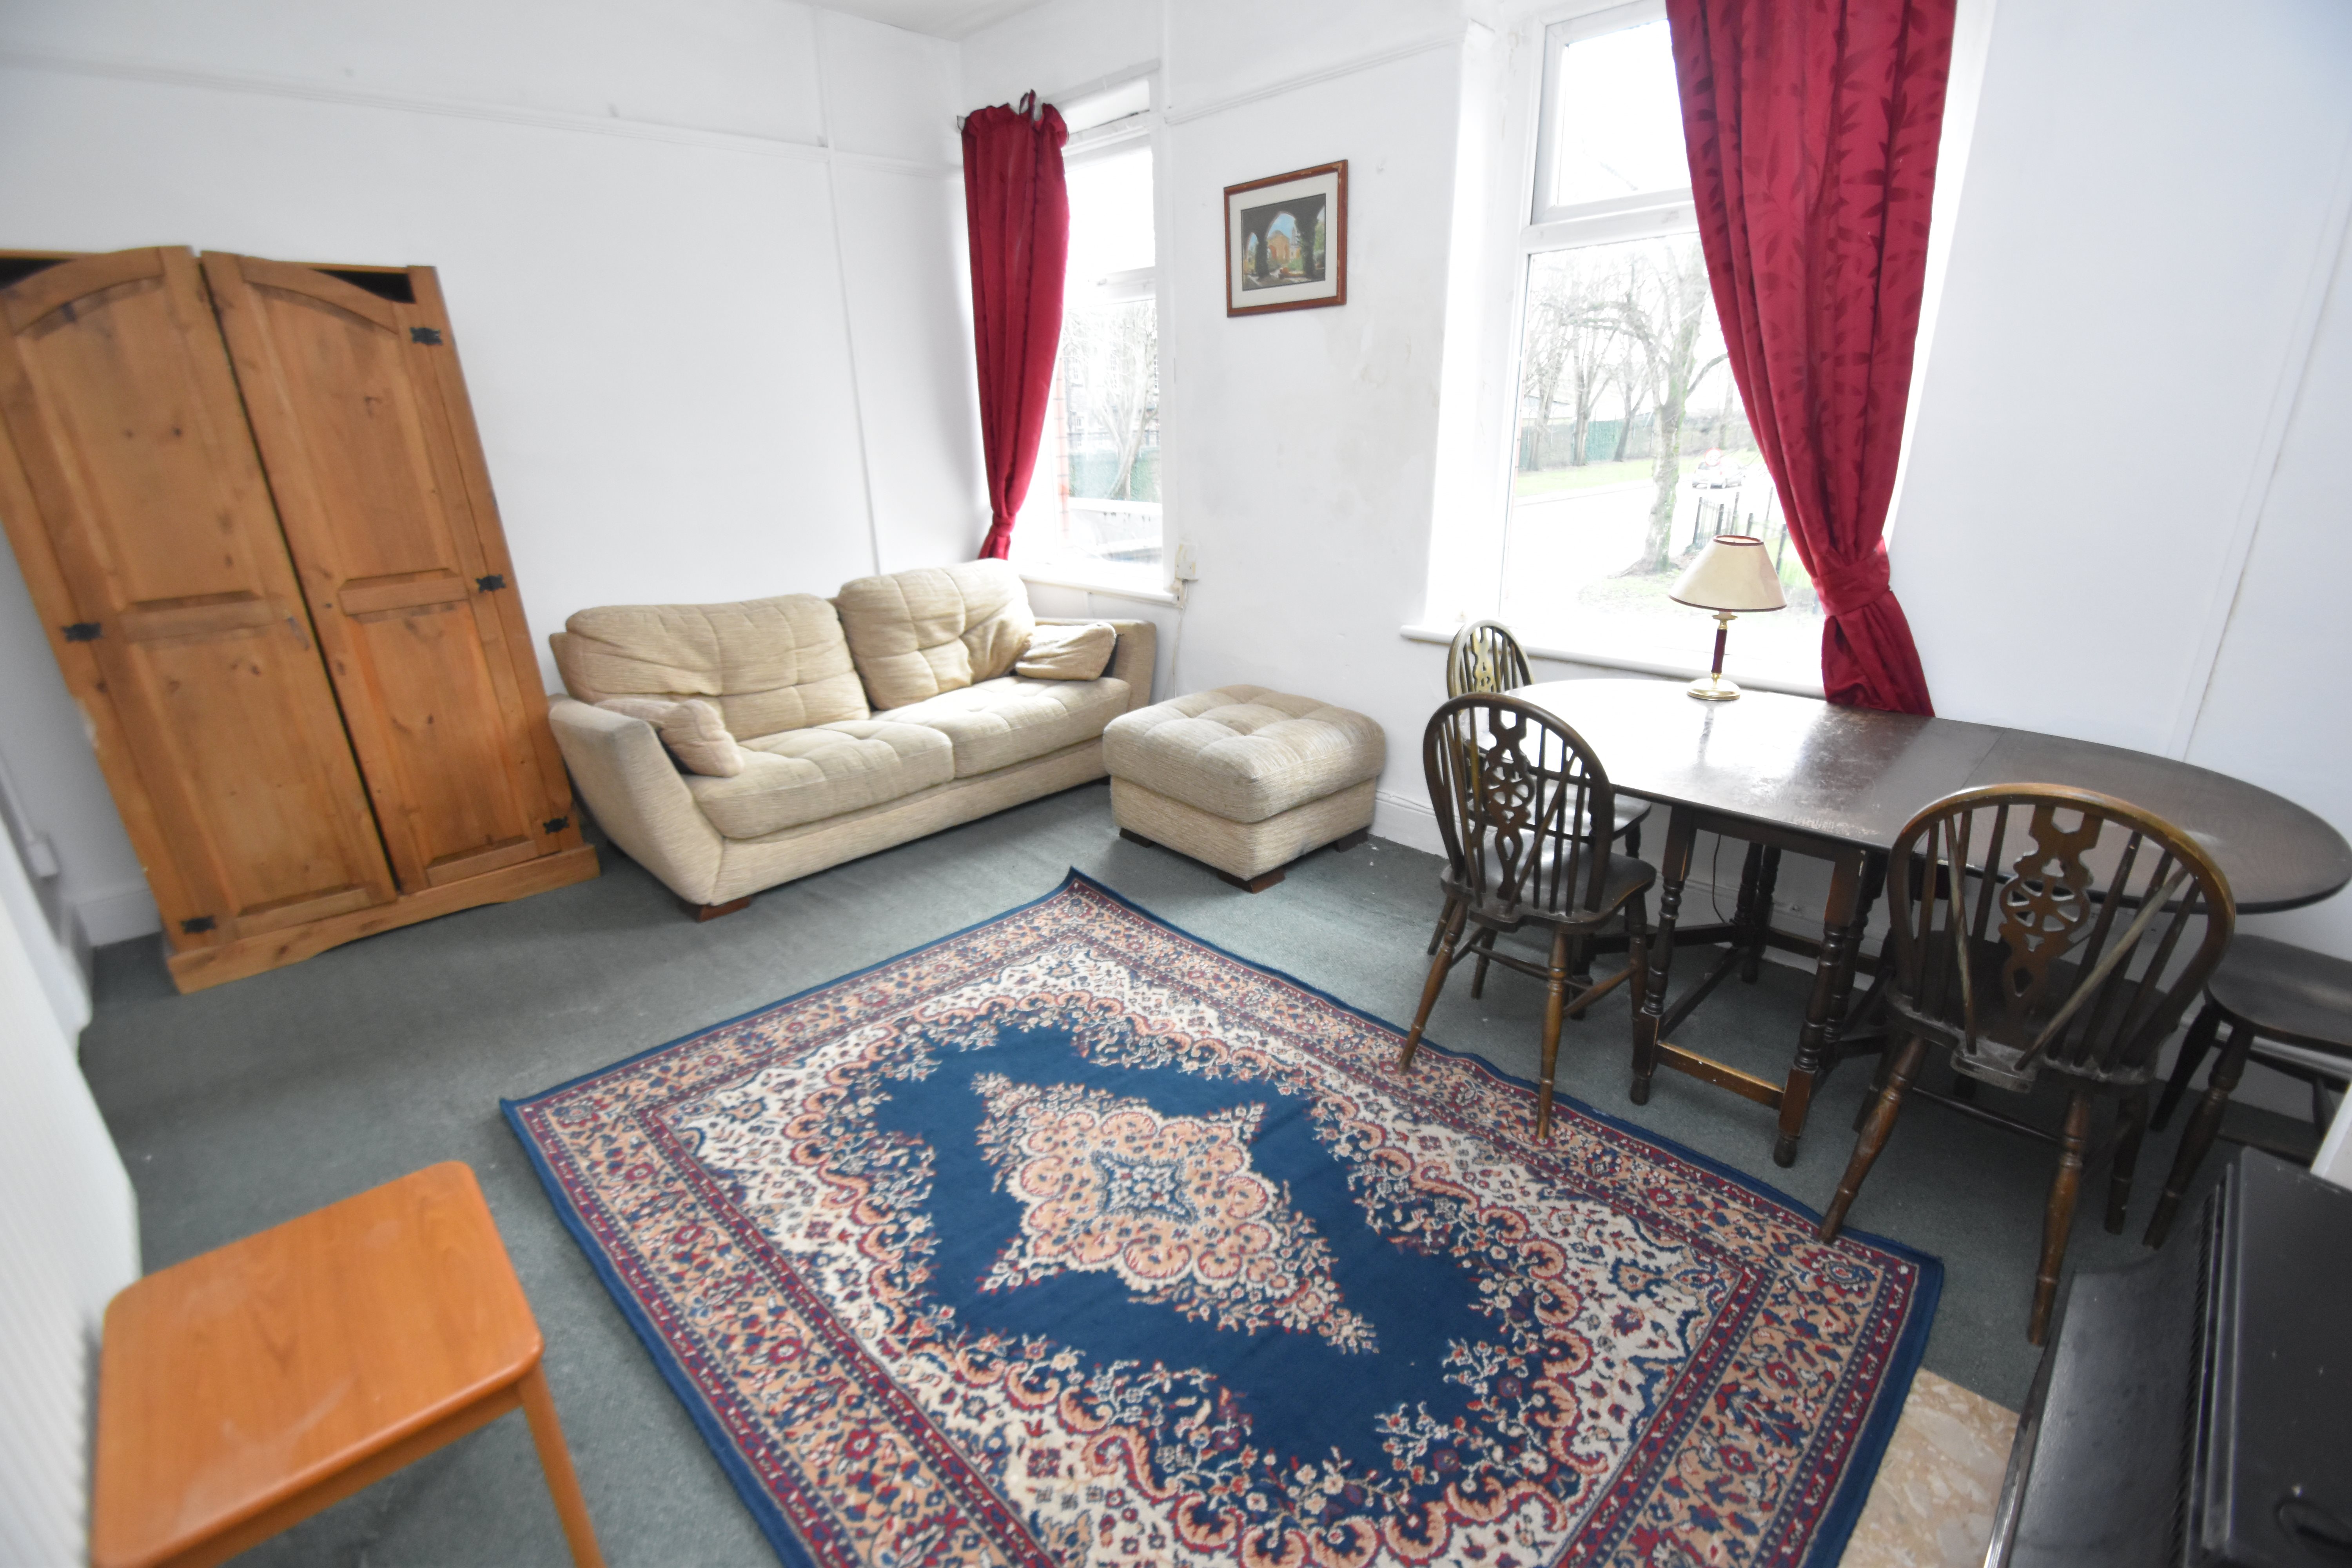 1 bed flat to rent in Whitchurch Road, Gabalfa - Property Image 1